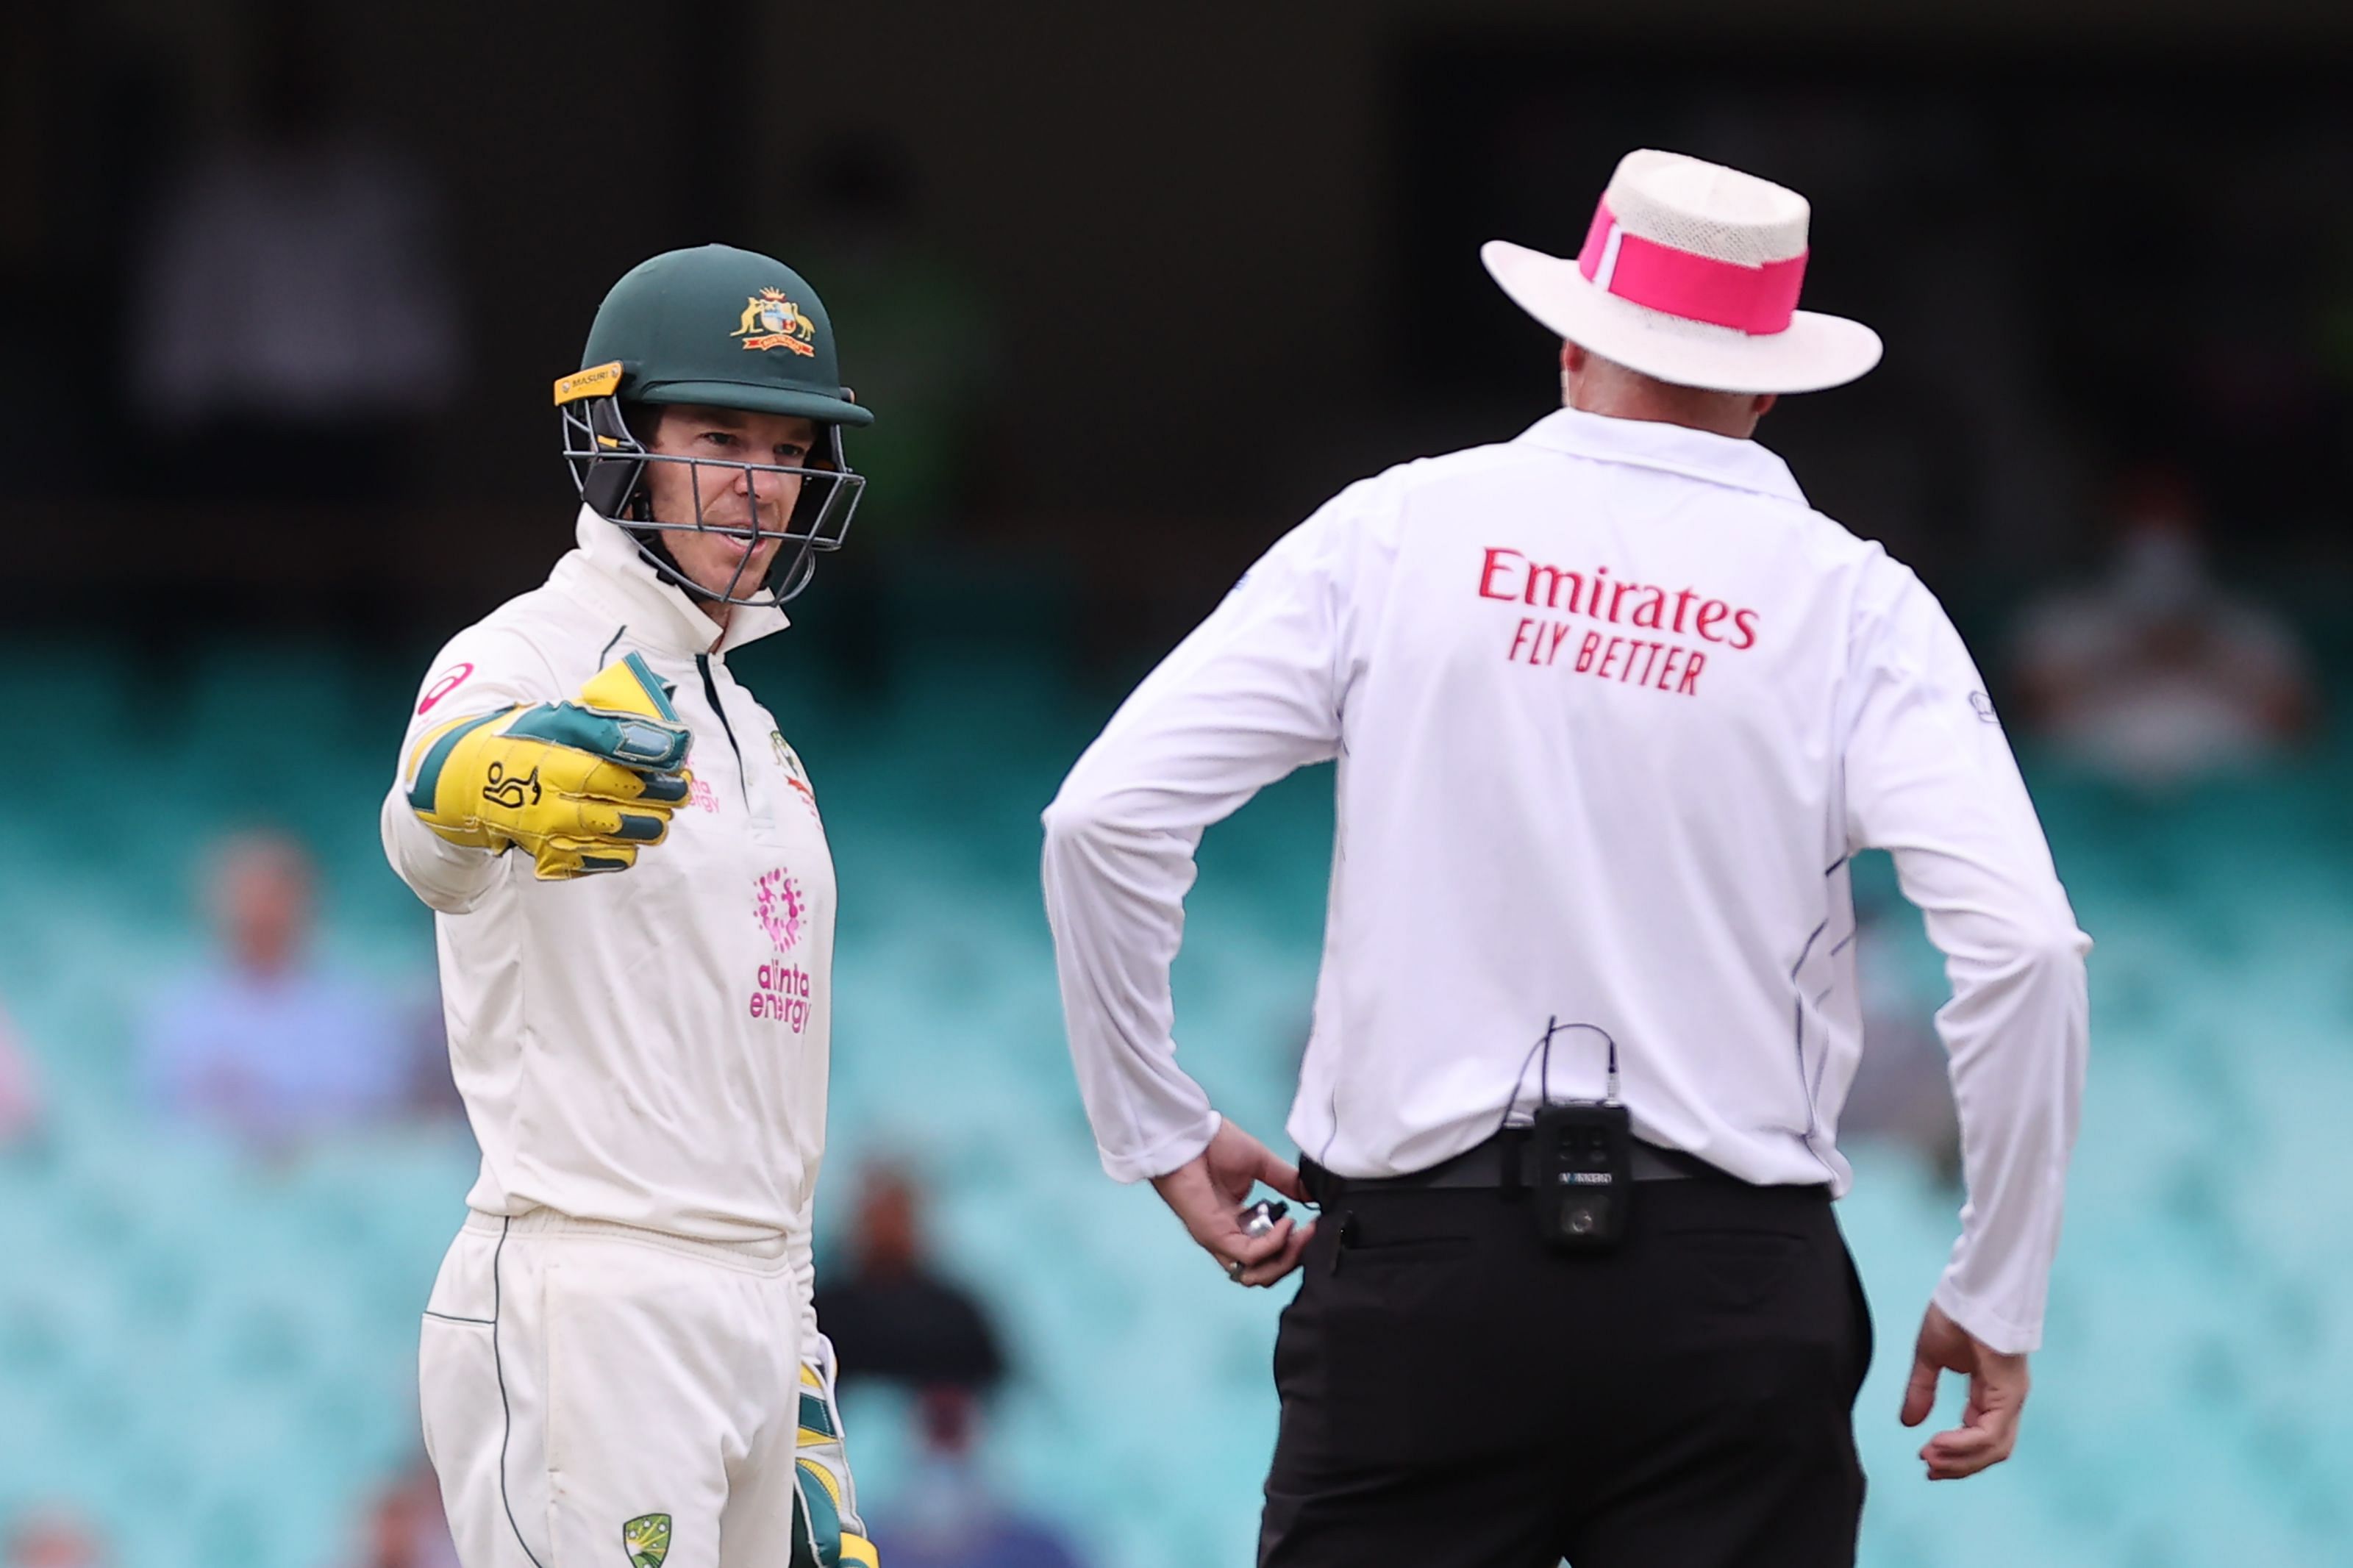 Australia's captain Tim Paine (L) speaks with an umpire during the second day of the third cricket Test match between Australia and India at the Sydney Cricket Ground. Credit: AFP